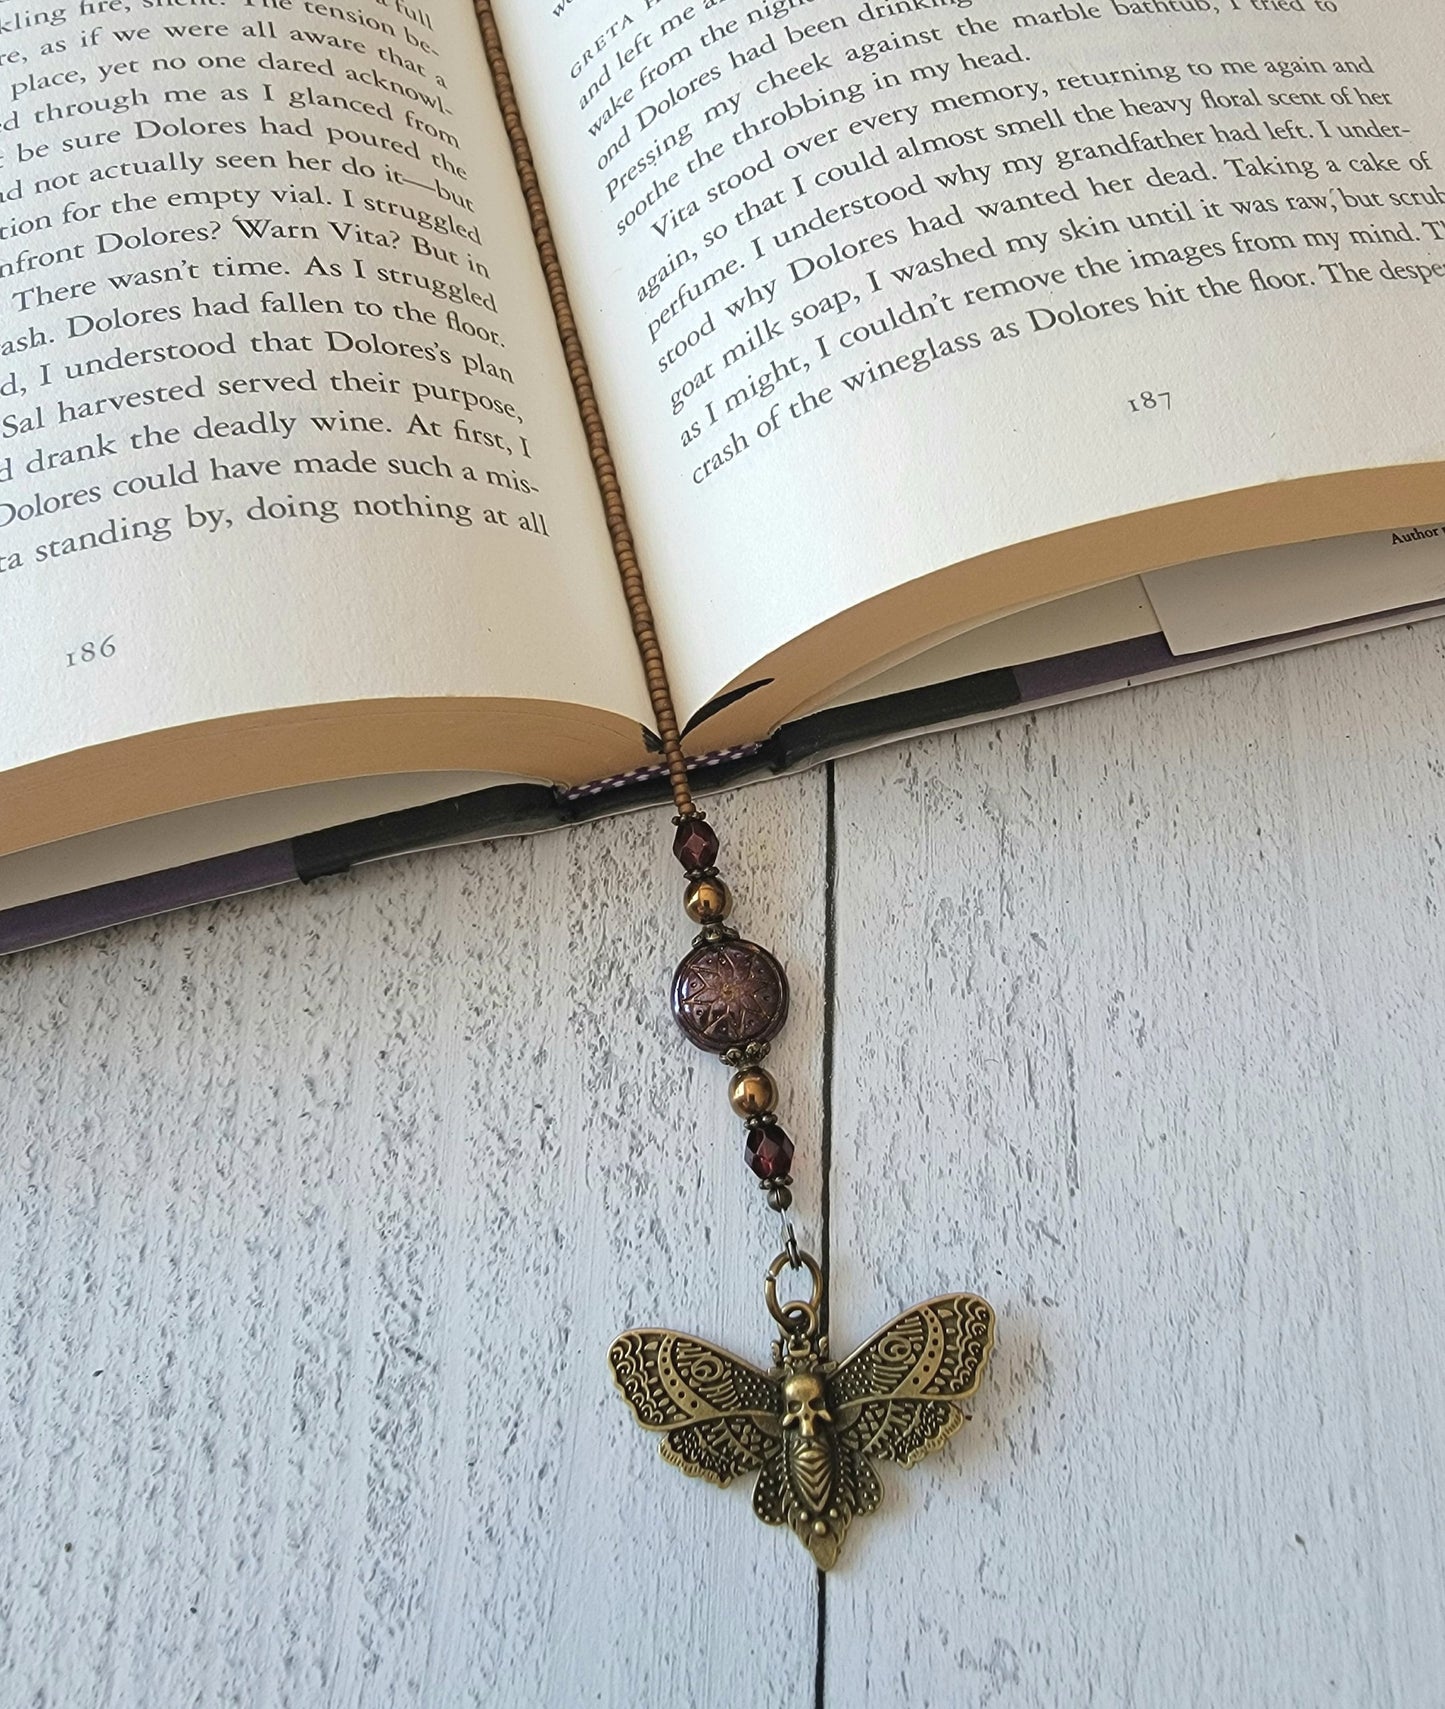 Gothic-inspired Beaded Bookmark with Hawkmoth Charm - Perfect for Gothic Literature Lovers